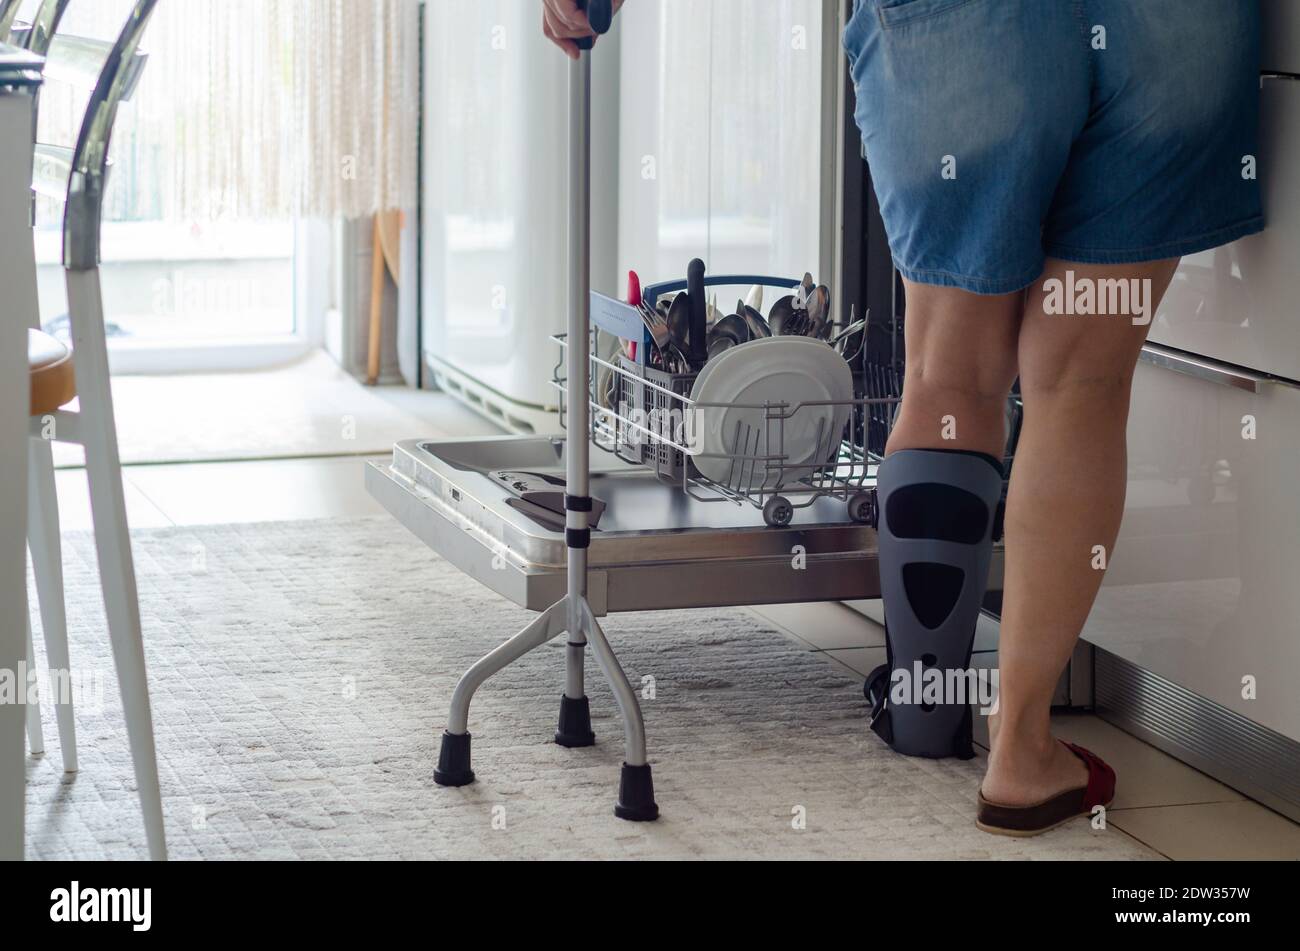 The woman with a orthotics on her foot is emptying the dishwasher in the kitchen Stock Photo